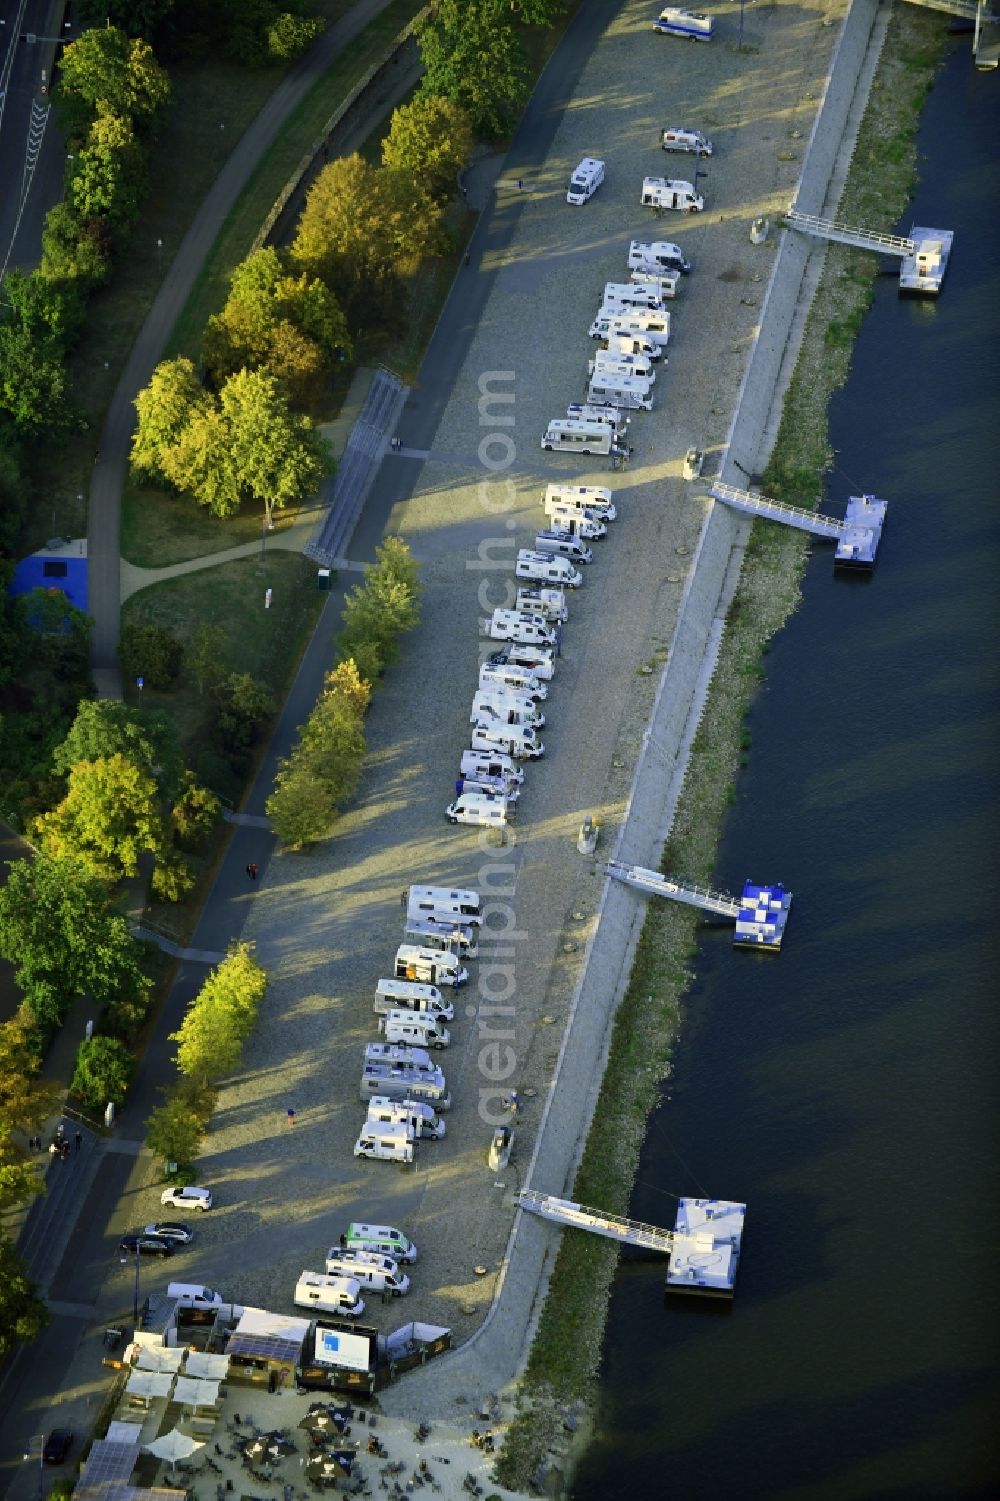 Aerial photograph Magdeburg - Caravans and RVs on the RV site Magdeburg Petrifoerderer on elbe river shore in the district Zentrum in Magdeburg in the state Saxony-Anhalt, Germany